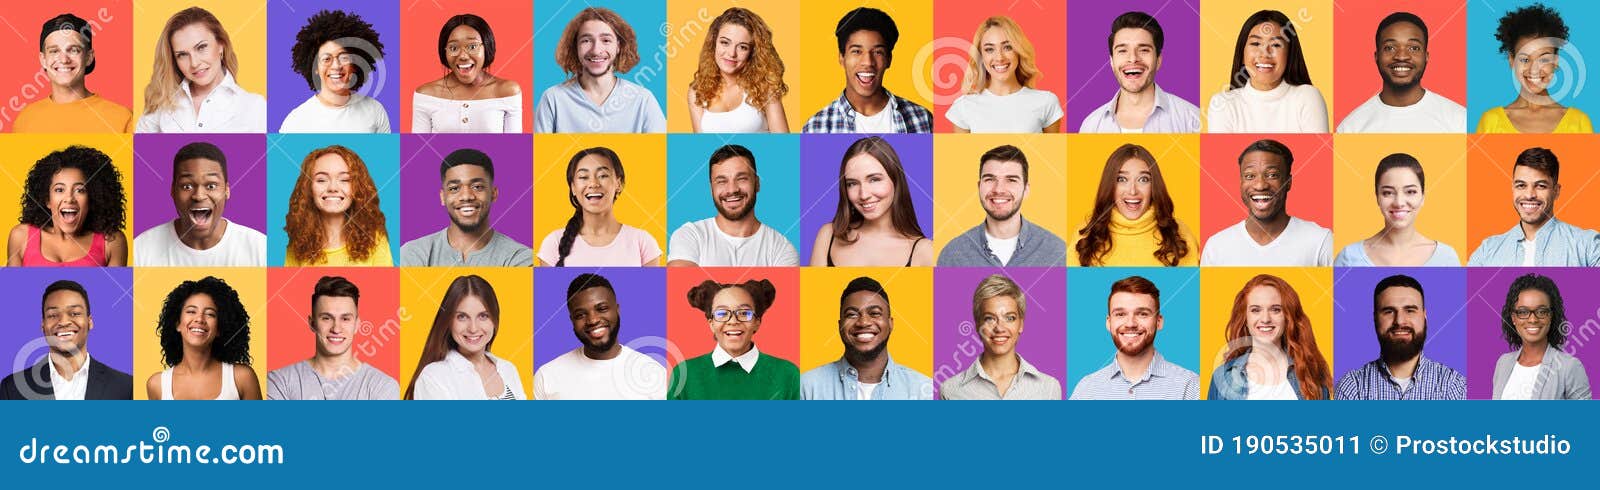 diverse millennial people`s faces smiling on colorful backgrounds, collage, panorama